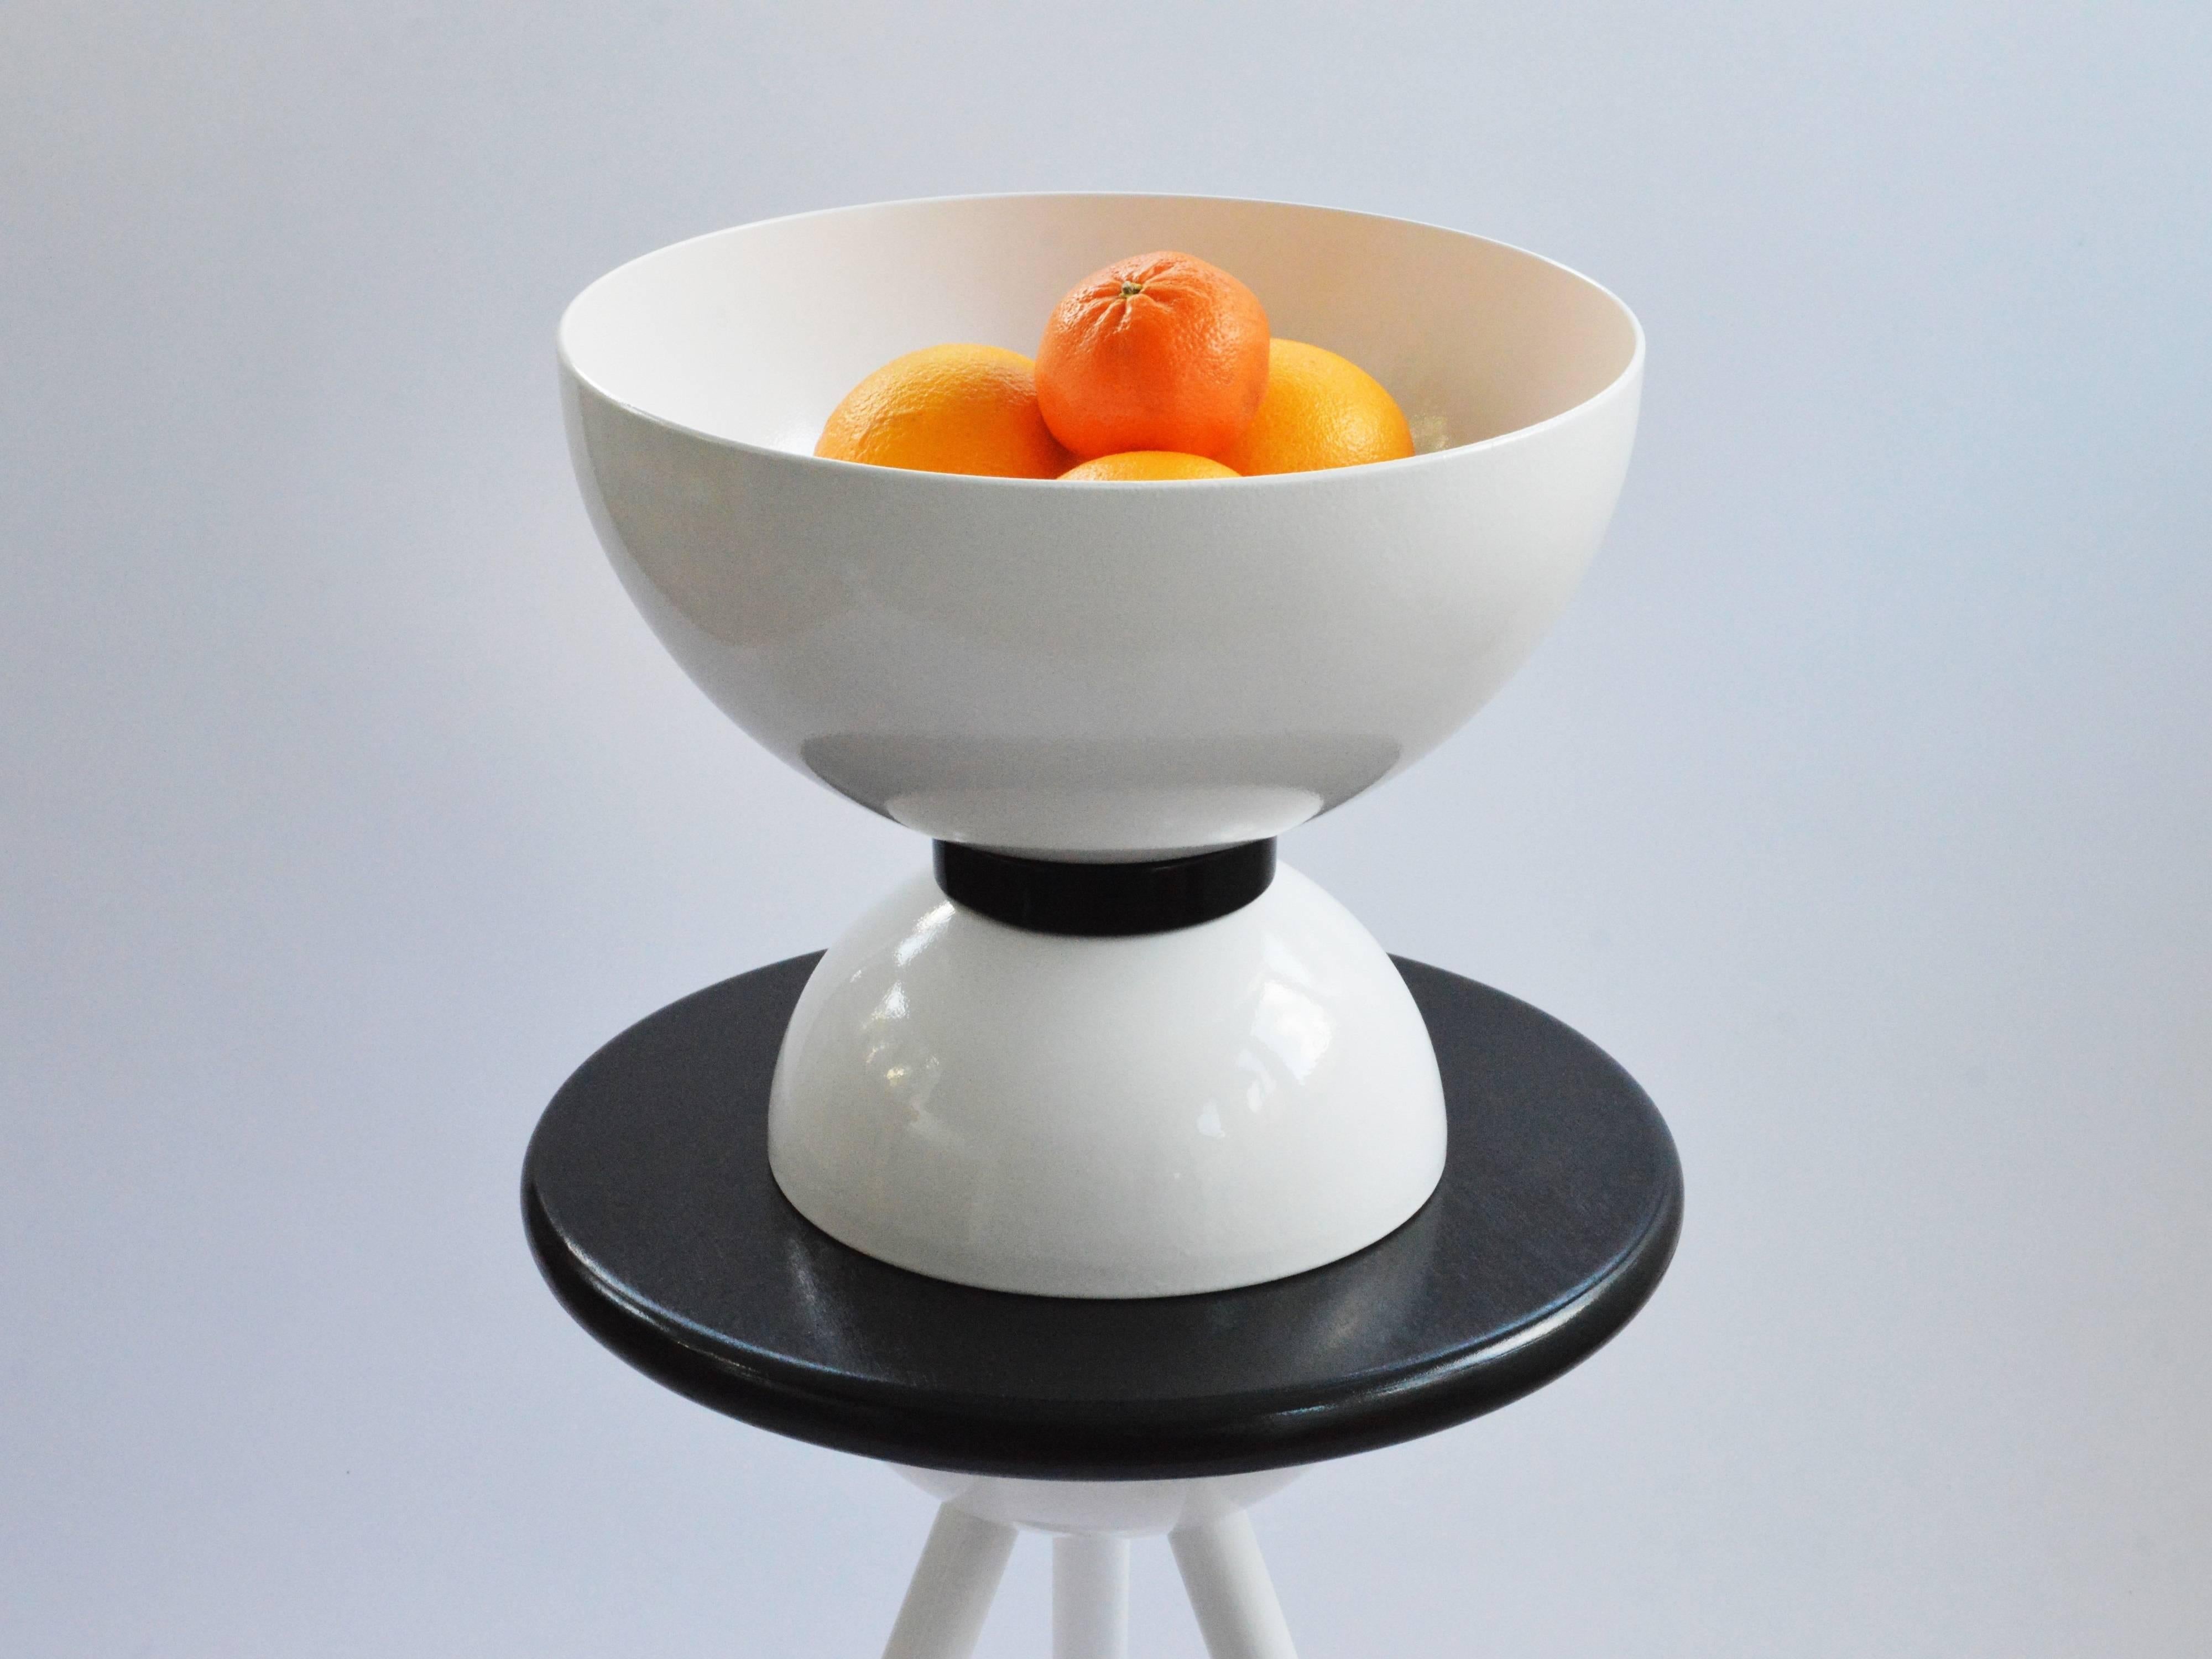 Contemporary Titan Bowl by Connor Holland in Powder-Coated Steel In New Condition For Sale In Icklesham, EMEA - British Isles